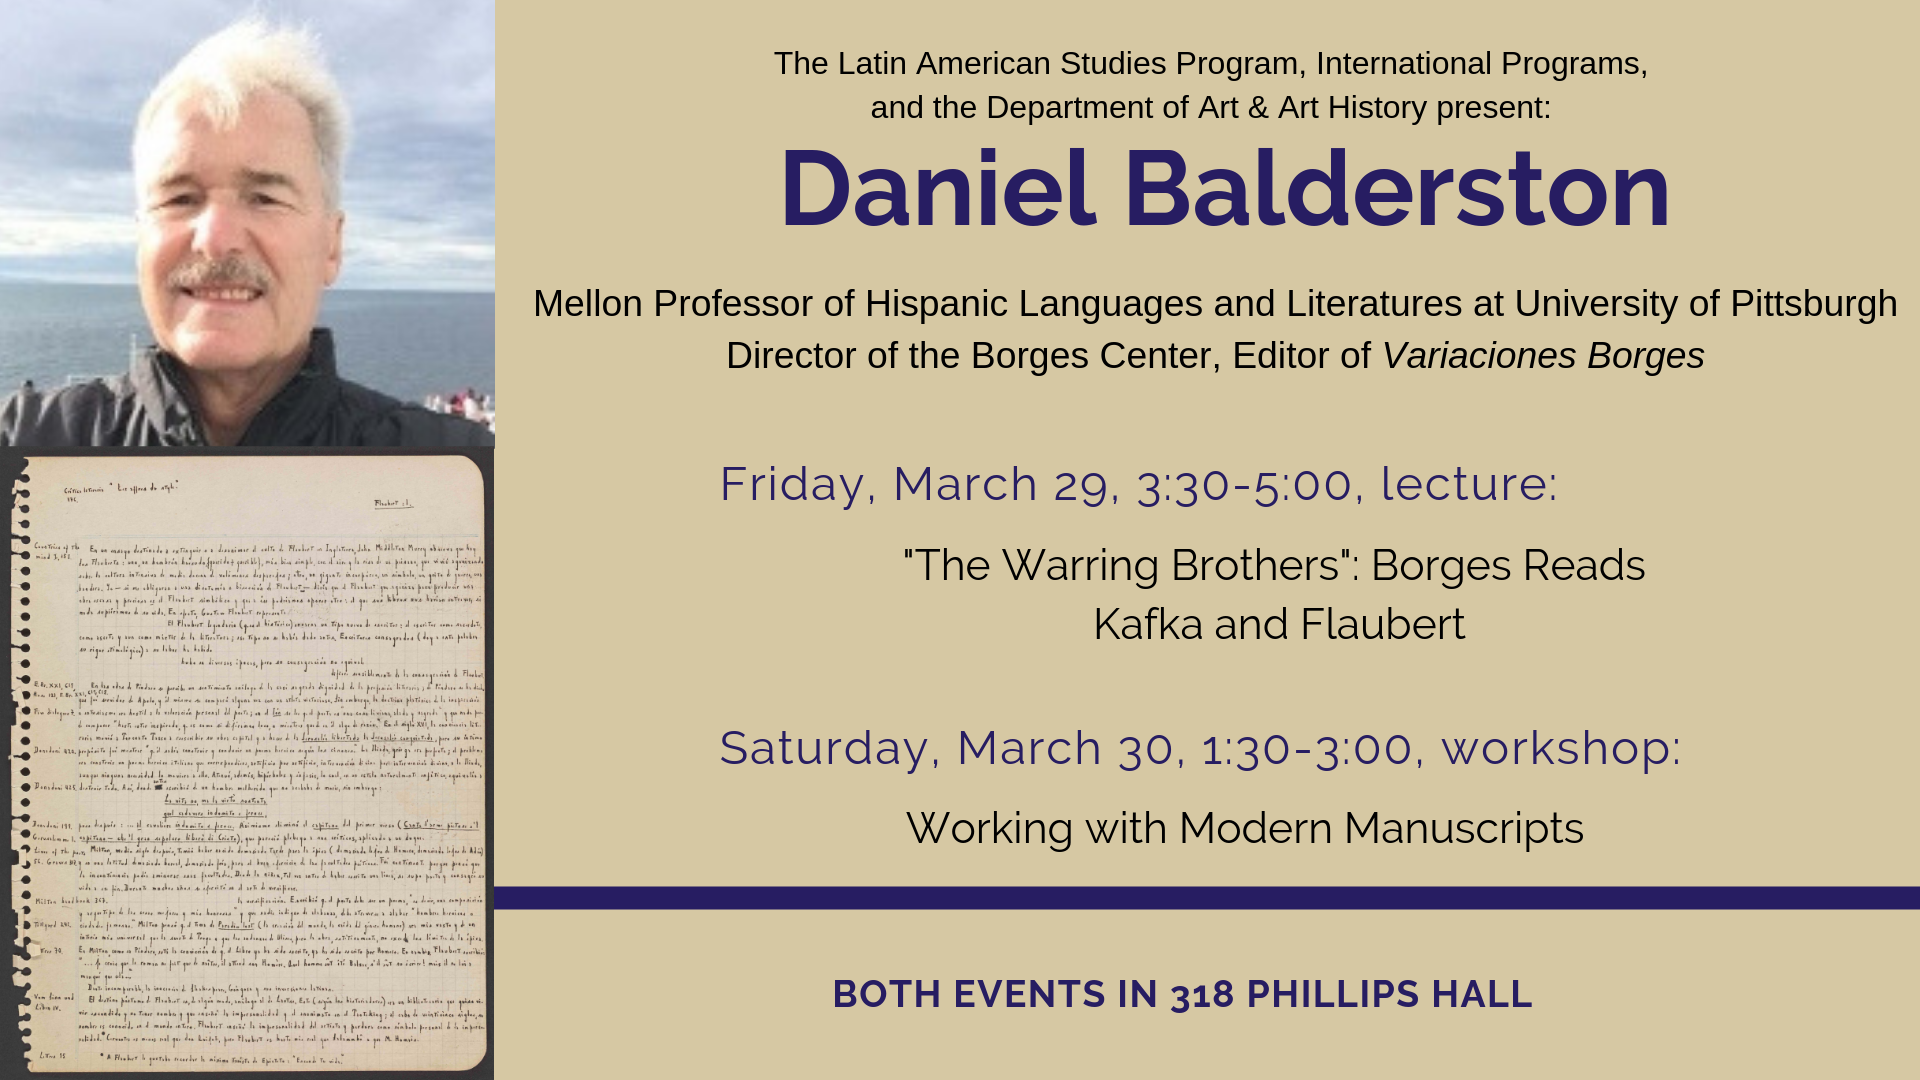 Daniel Balderston lecture on March 29 at 3:30 in 318 PH